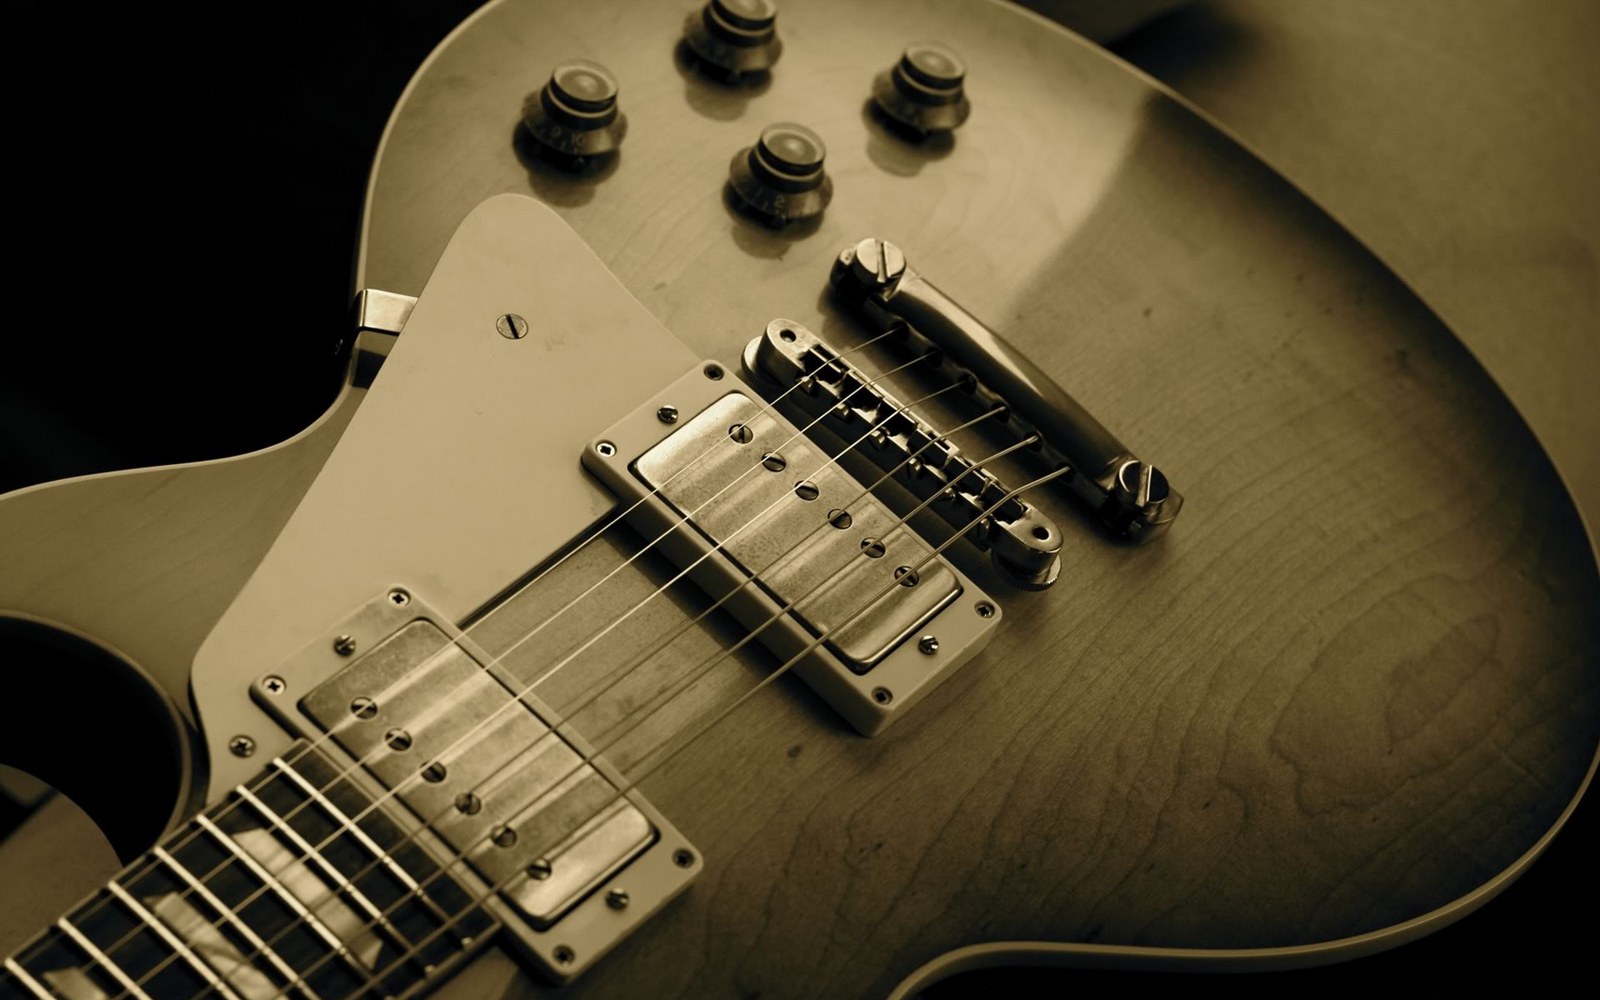 Classic Guitar wallpapers55com   Best Wallpapers for PCs Laptops